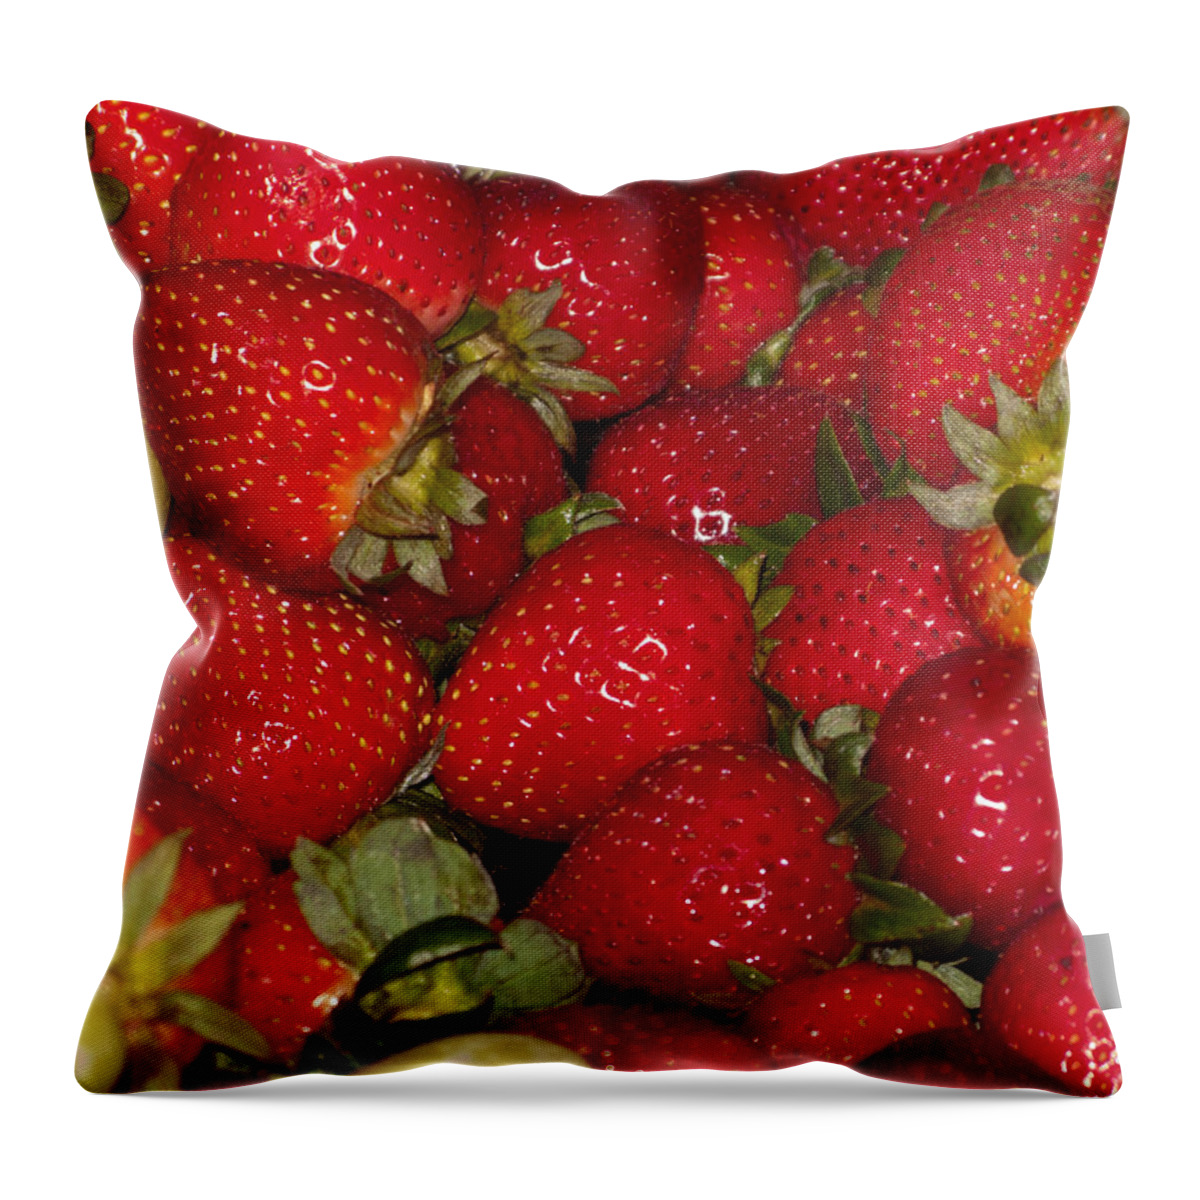 Food Throw Pillow featuring the photograph Strawberries 731 by Michael Fryd